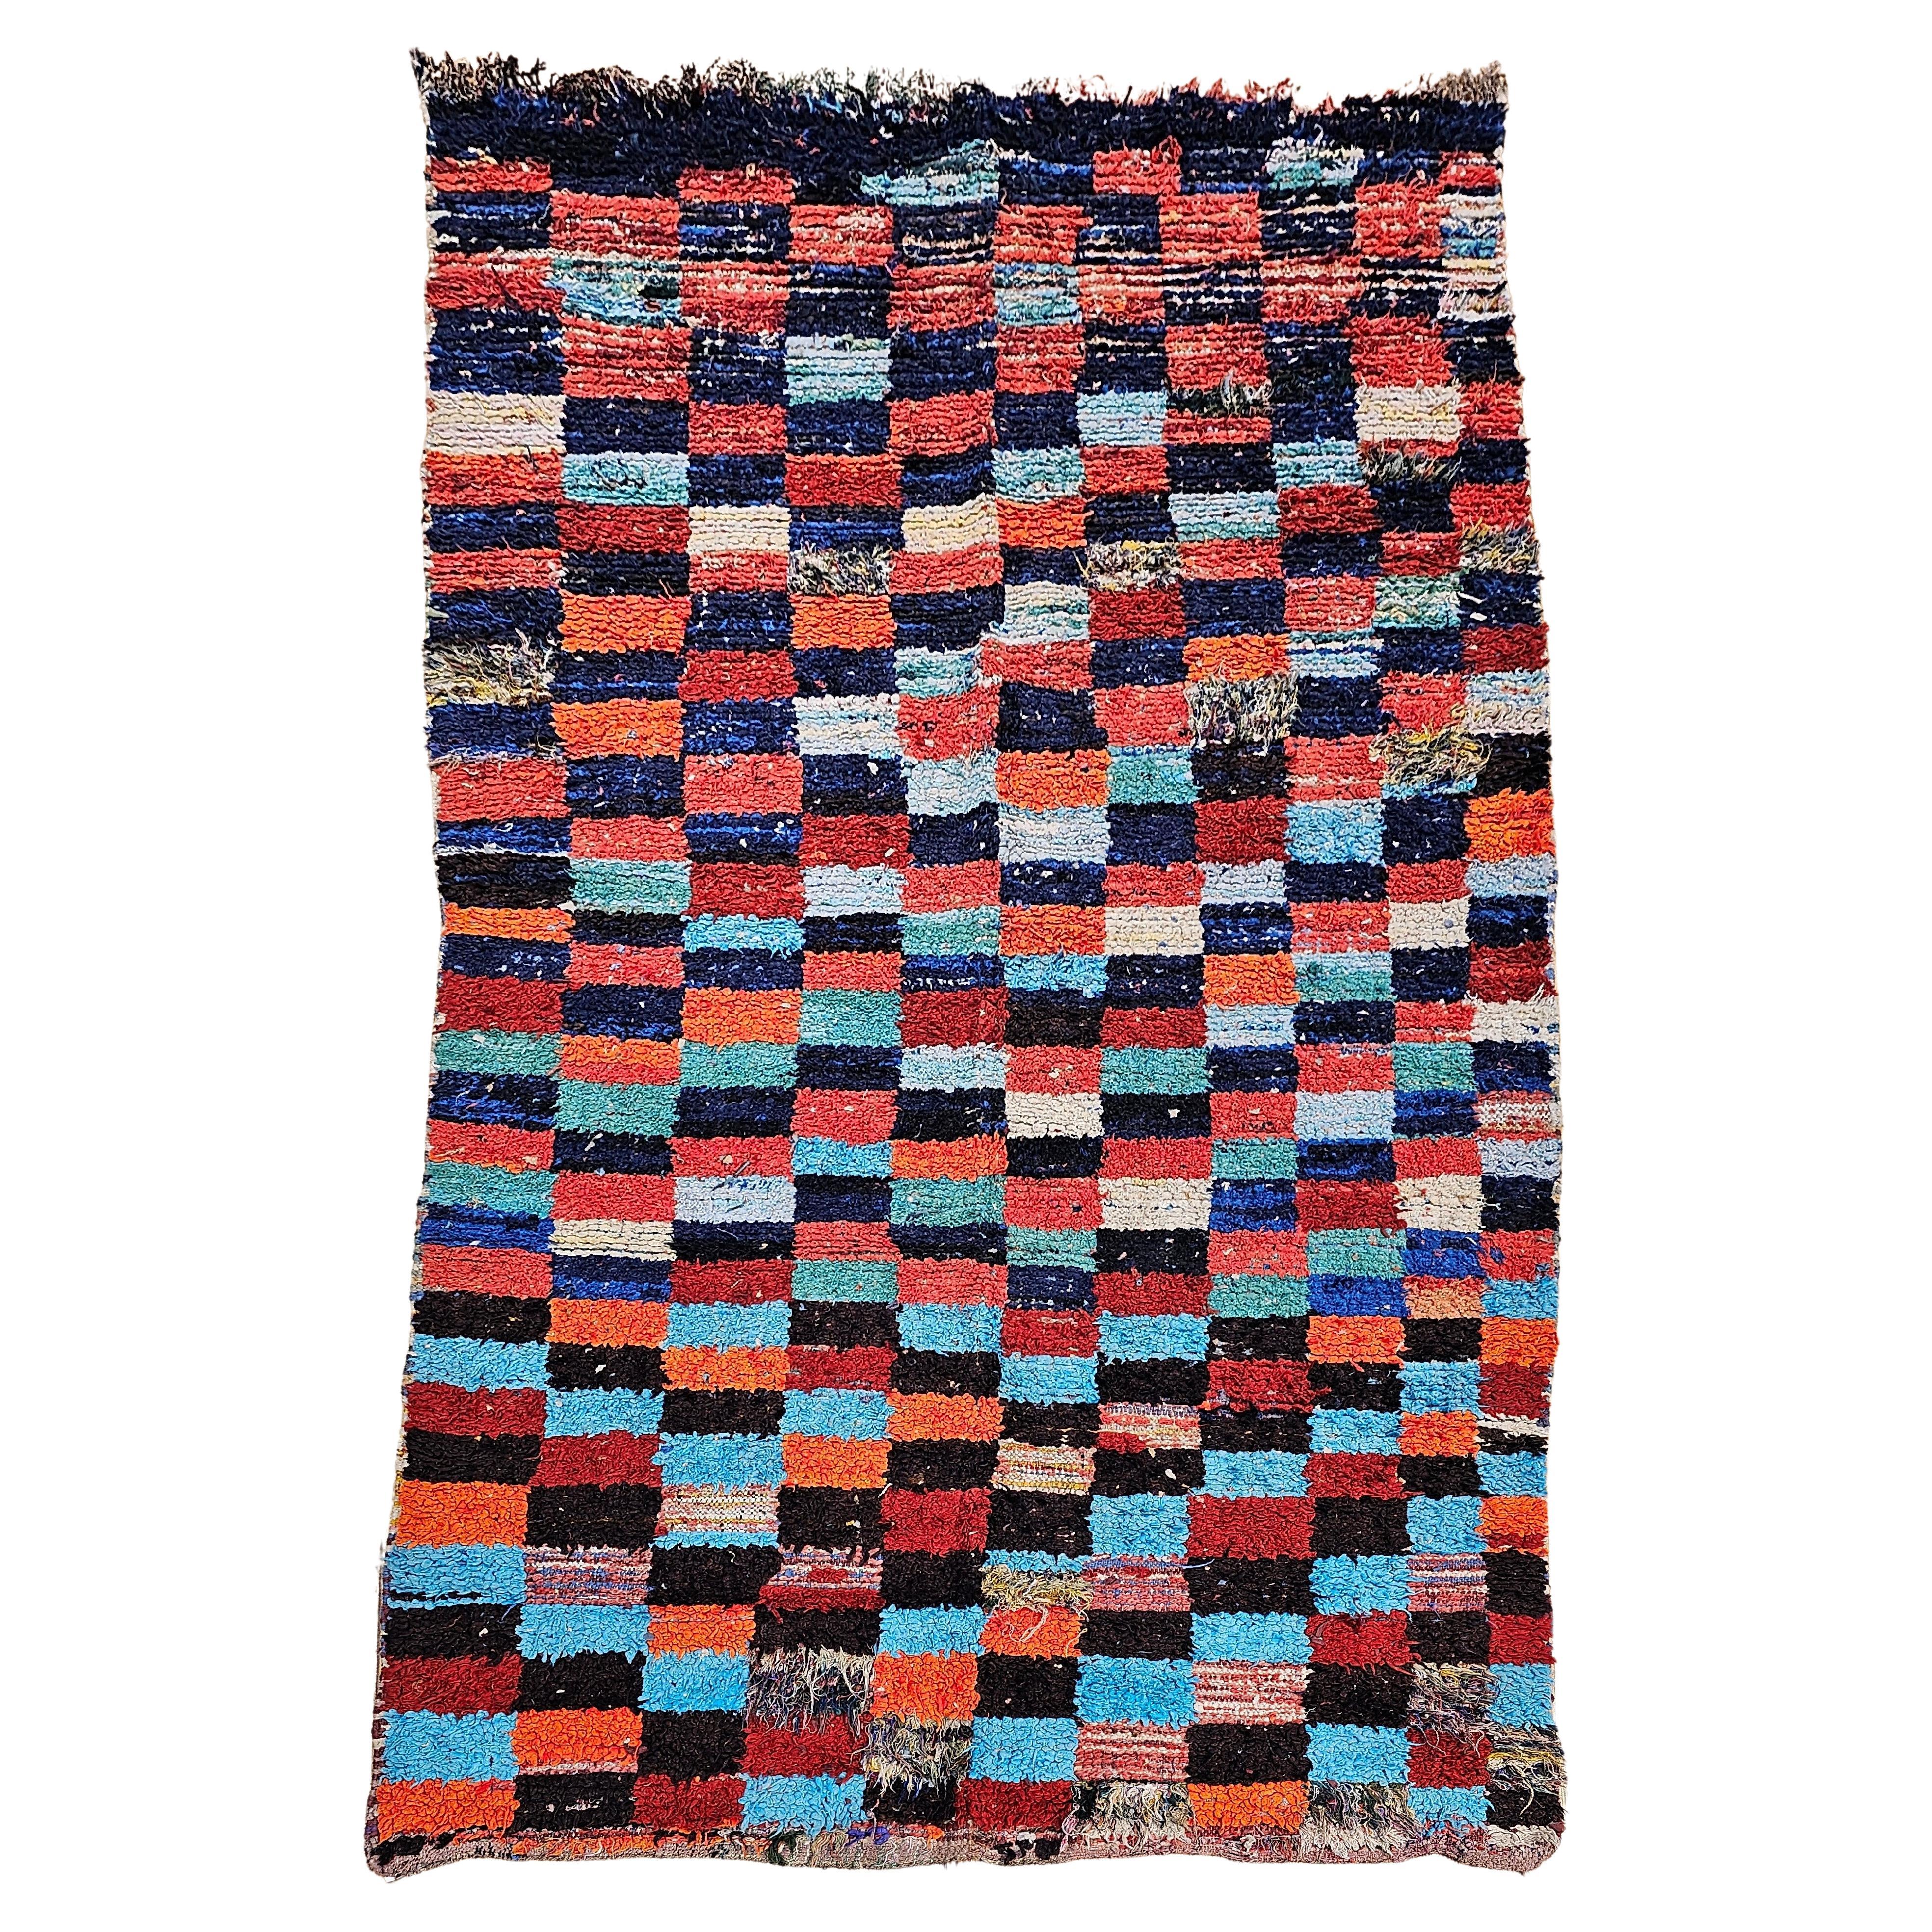 Vintage Moroccan Boucherouite shag area rug is in a colorful checkered pattern. The many colors include green,  blue, red, orange and many more. The word 